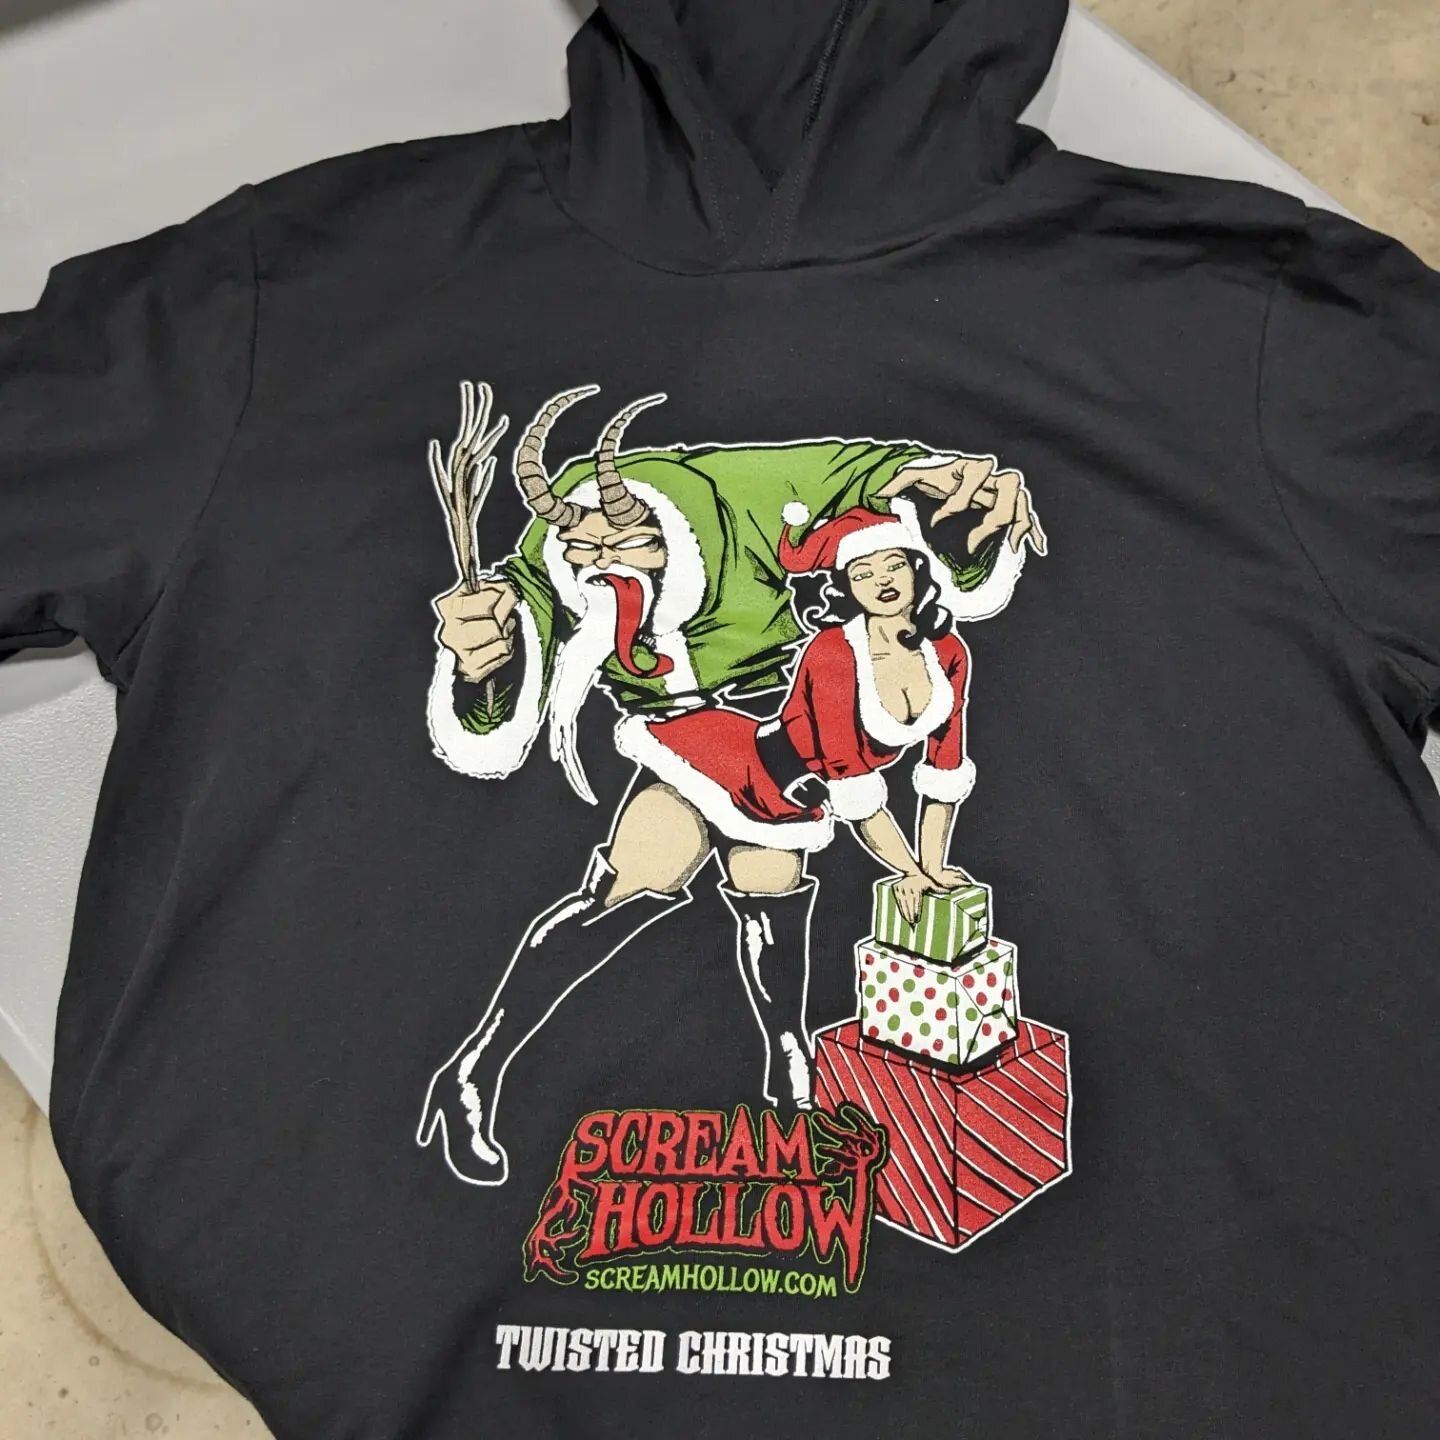 New design and 5 color print for Scream Hollow's Twisted Christmas event! Swipe to see the color layers in action! Merry Christmas to all you lovely oddballs out there!